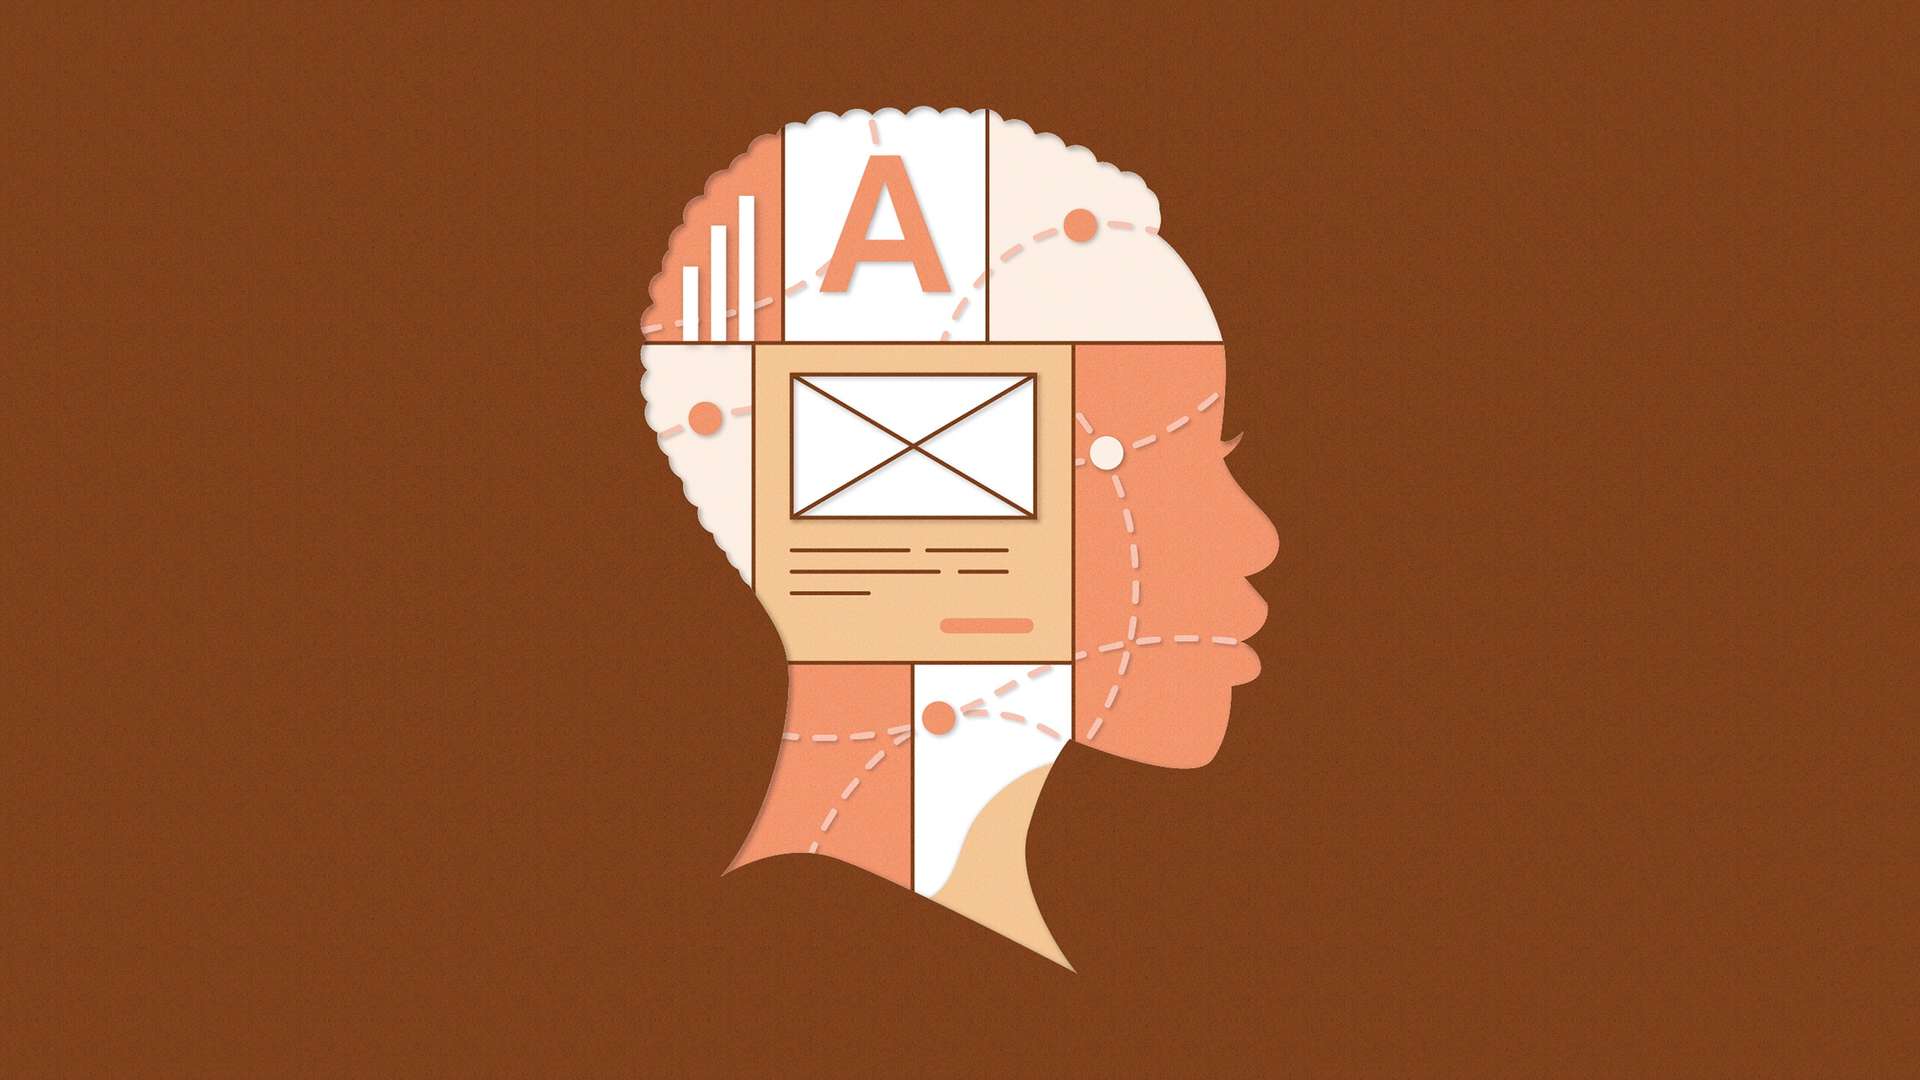 In the silhouette of a profile head, lines connect letters to wireframes and graphs, symbolizing the work done in a UX content design career.